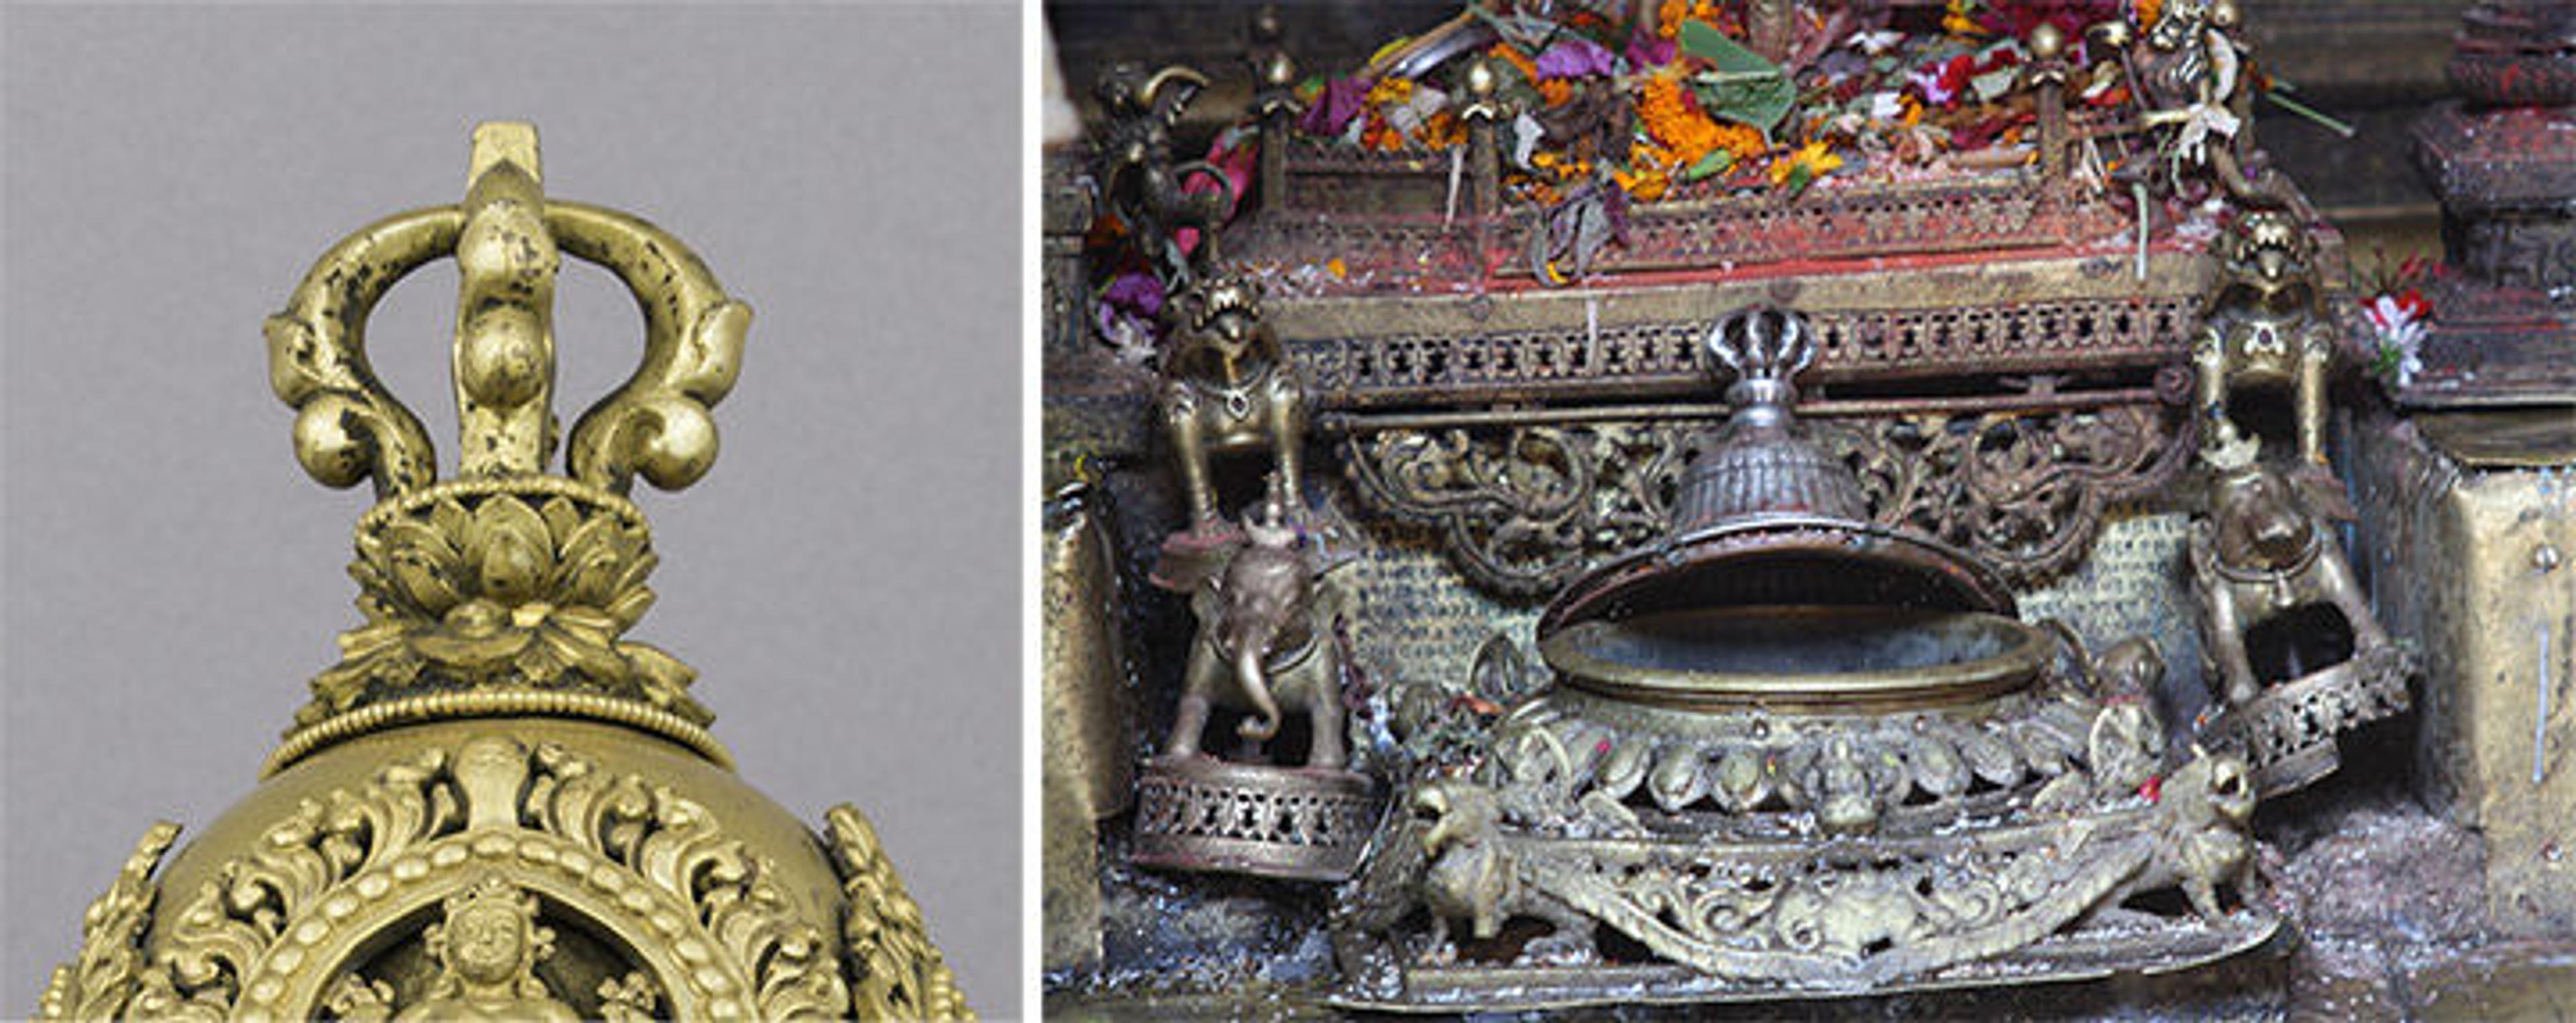 Vajra ornament from crown on left and half-vajra on ritual incense burner, right